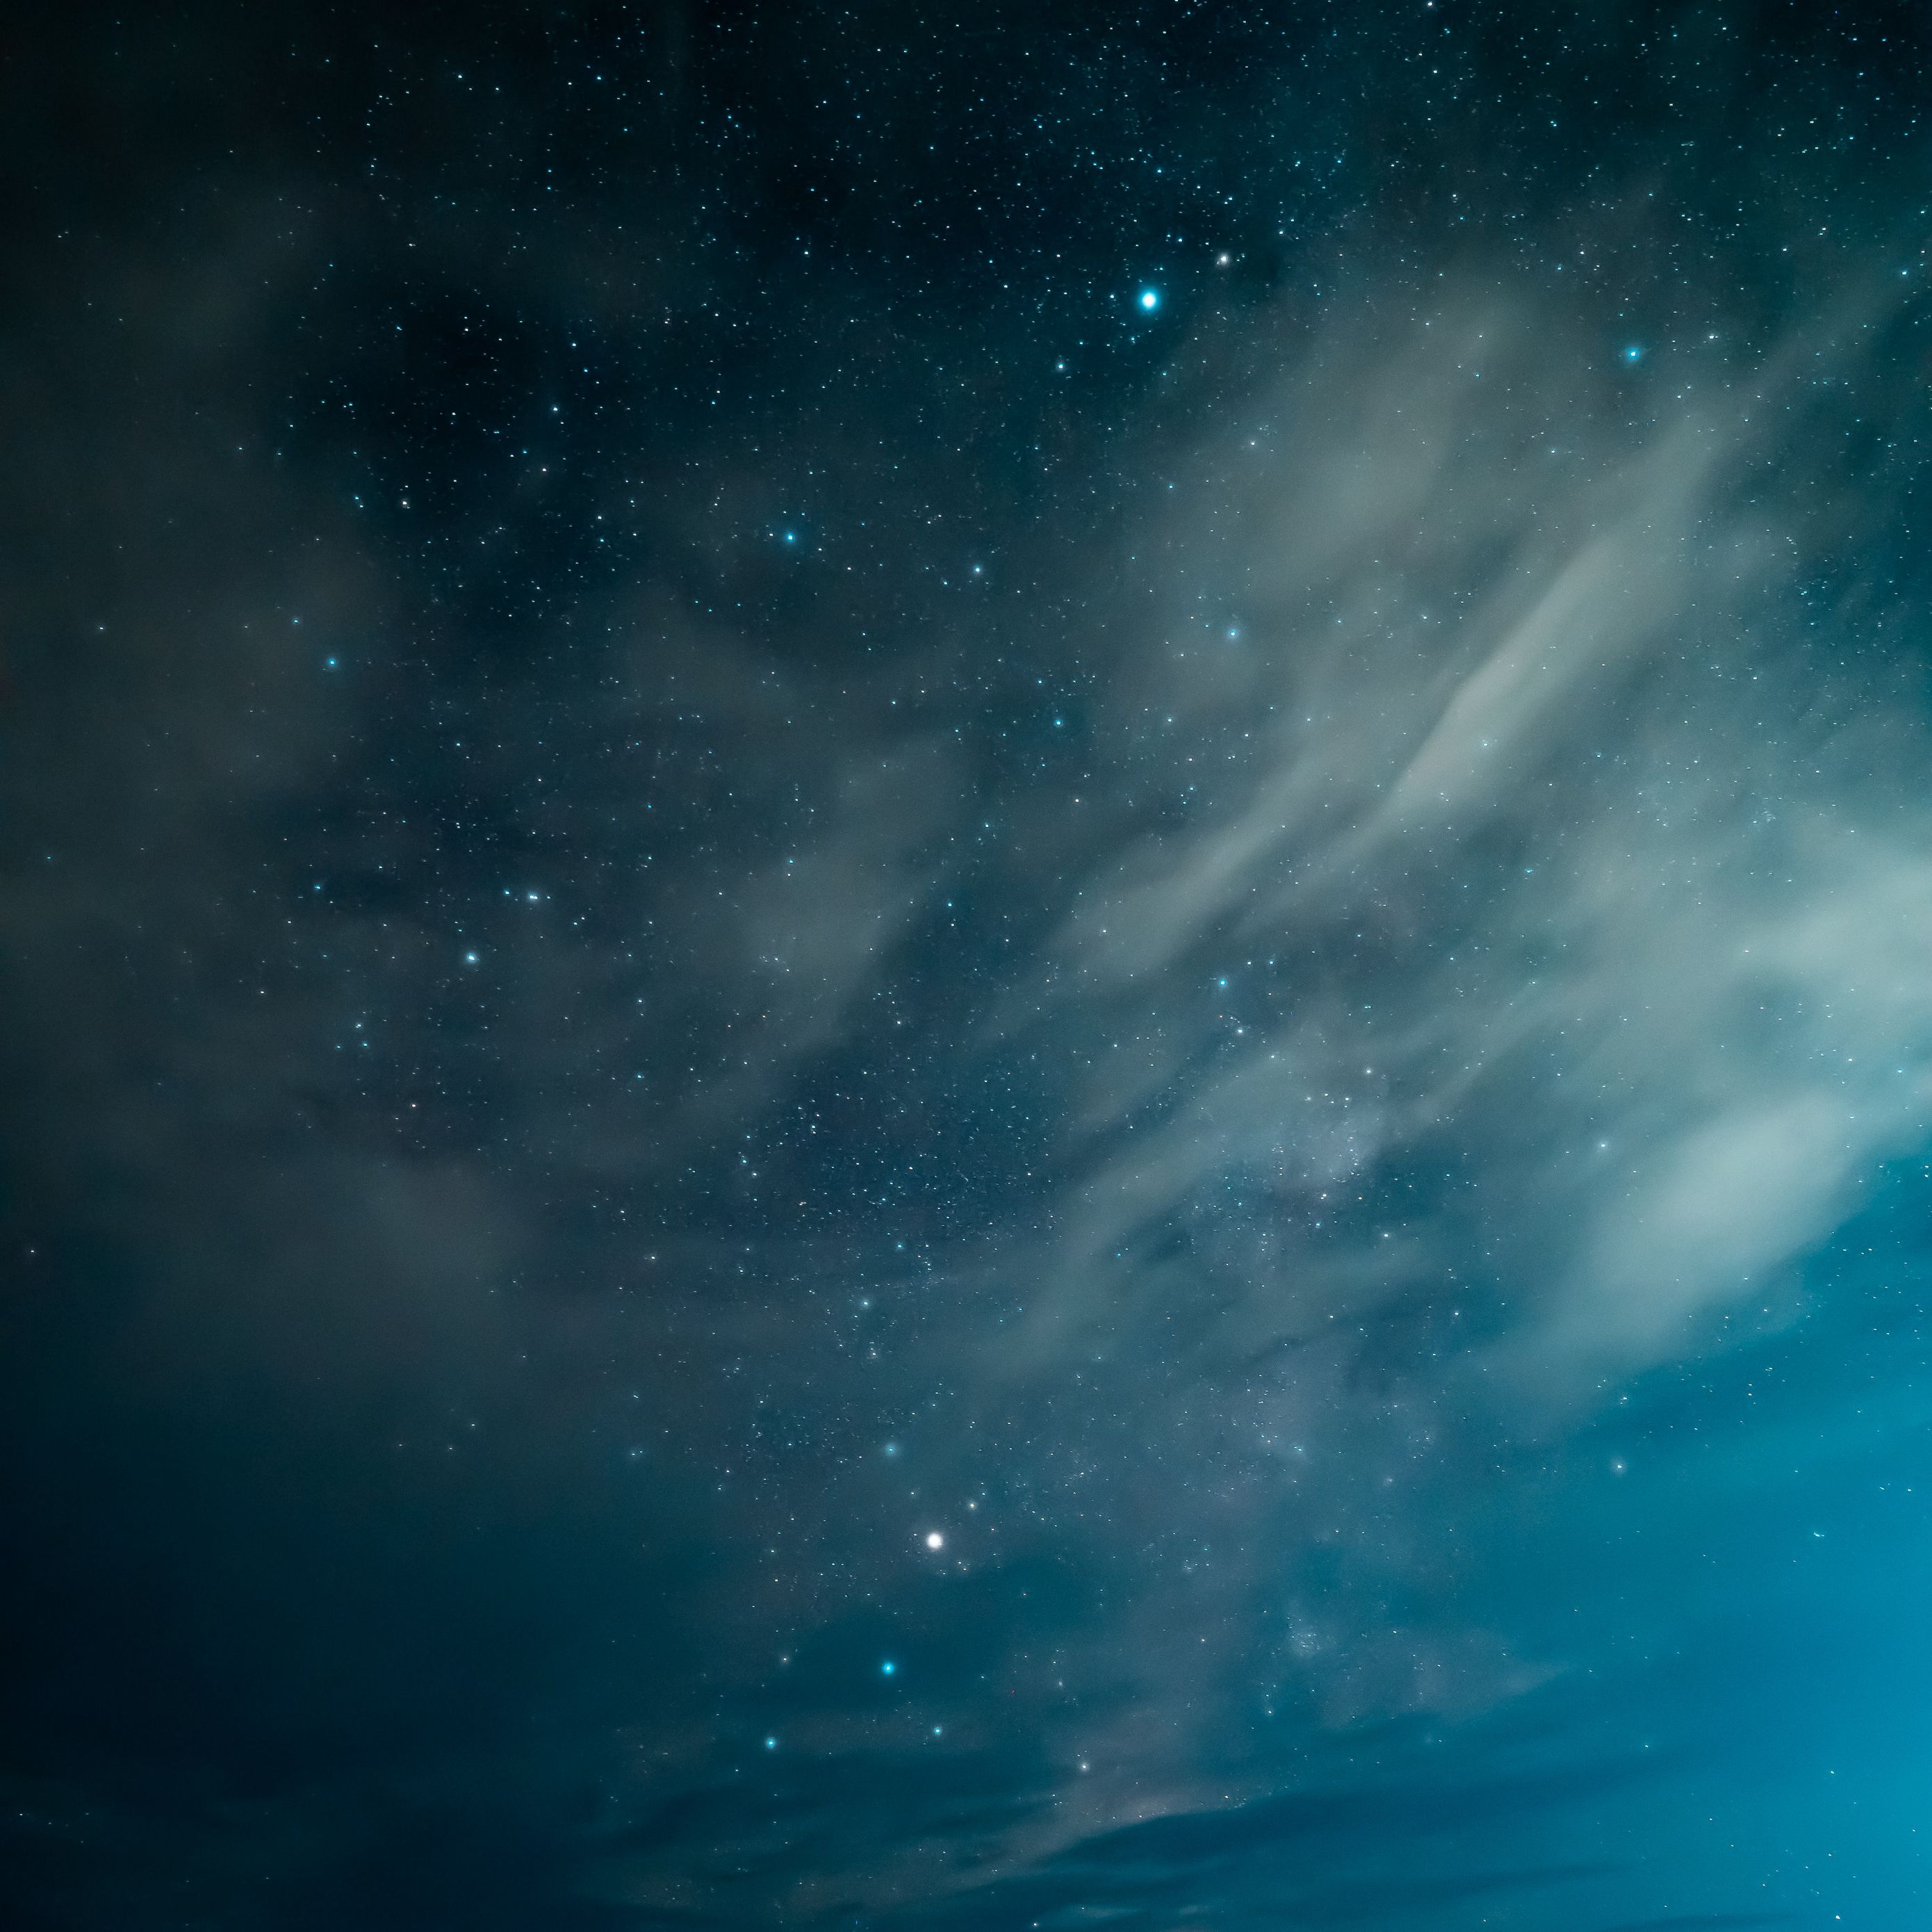 Download Wallpaper 2780x2780 Space Starry Sky Night Constellation Ipad Air Ipad Air 2 Ipad 3 Ipad 4 Ipad Mini 2 Ipad Mini 3 Ipad Mini 4 Ipad Pro 9 7 For Parallax Hd Background